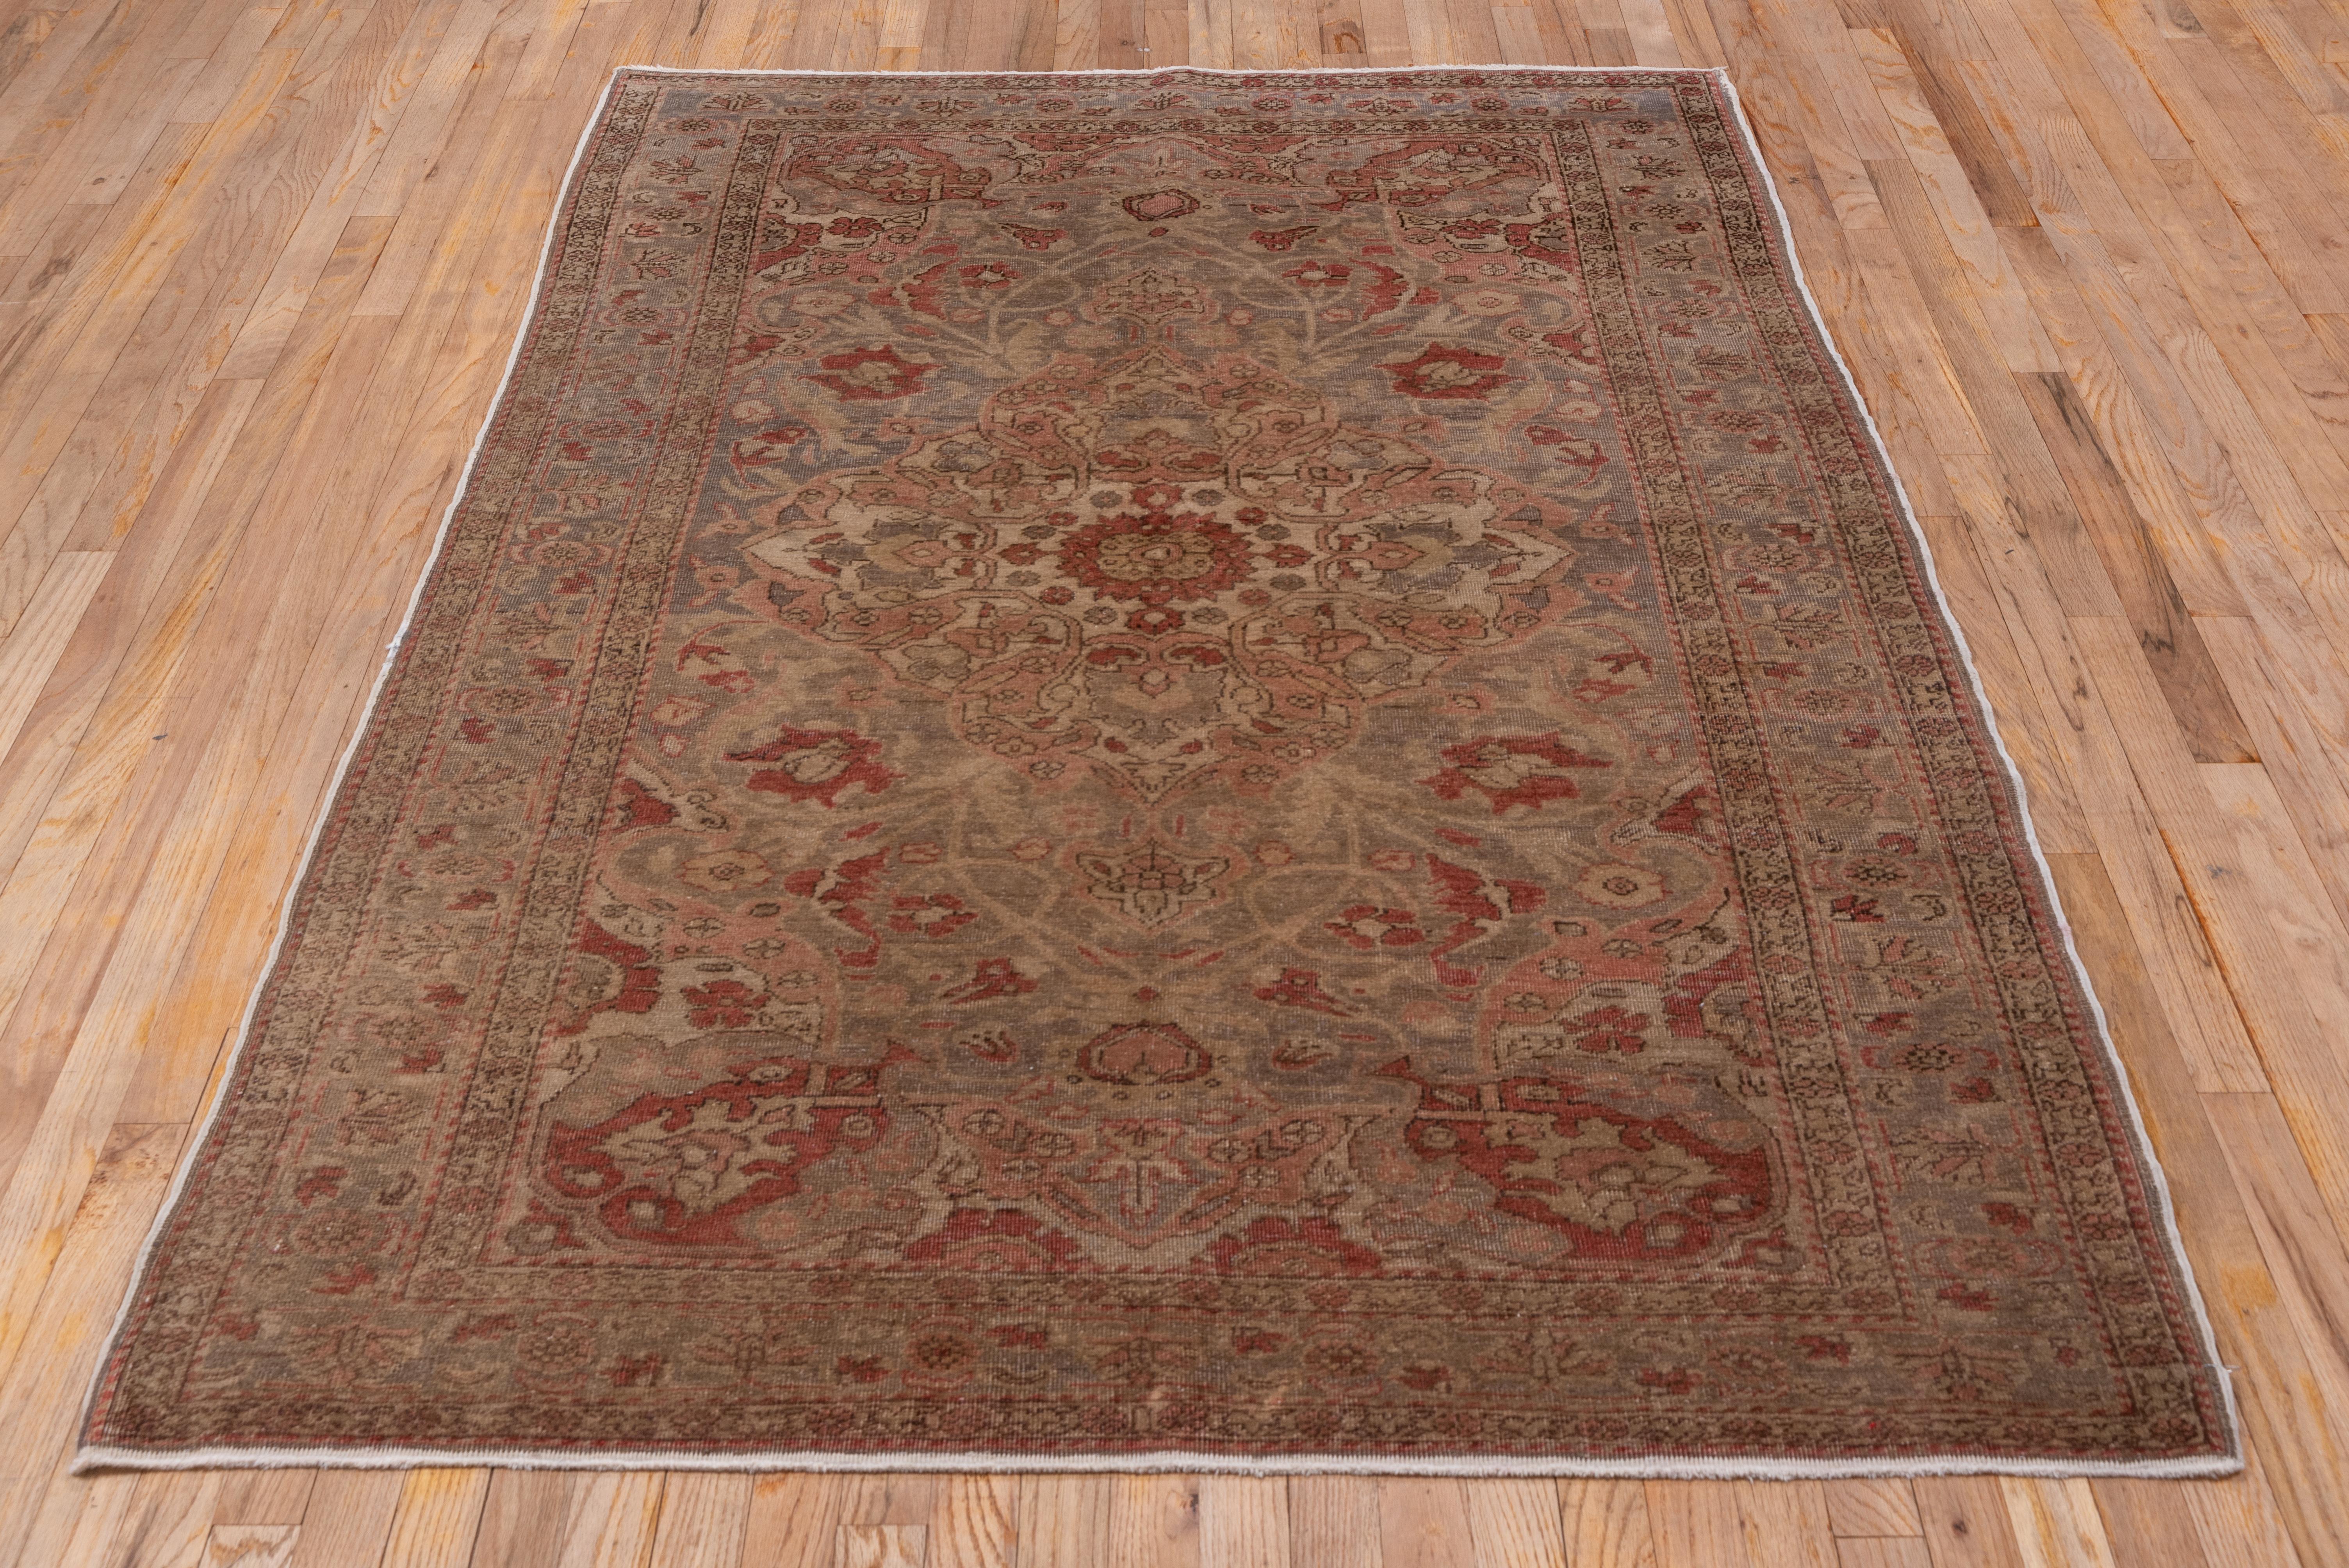 Turkish Oushak Rug, Warm Tones In Good Condition For Sale In New York, NY